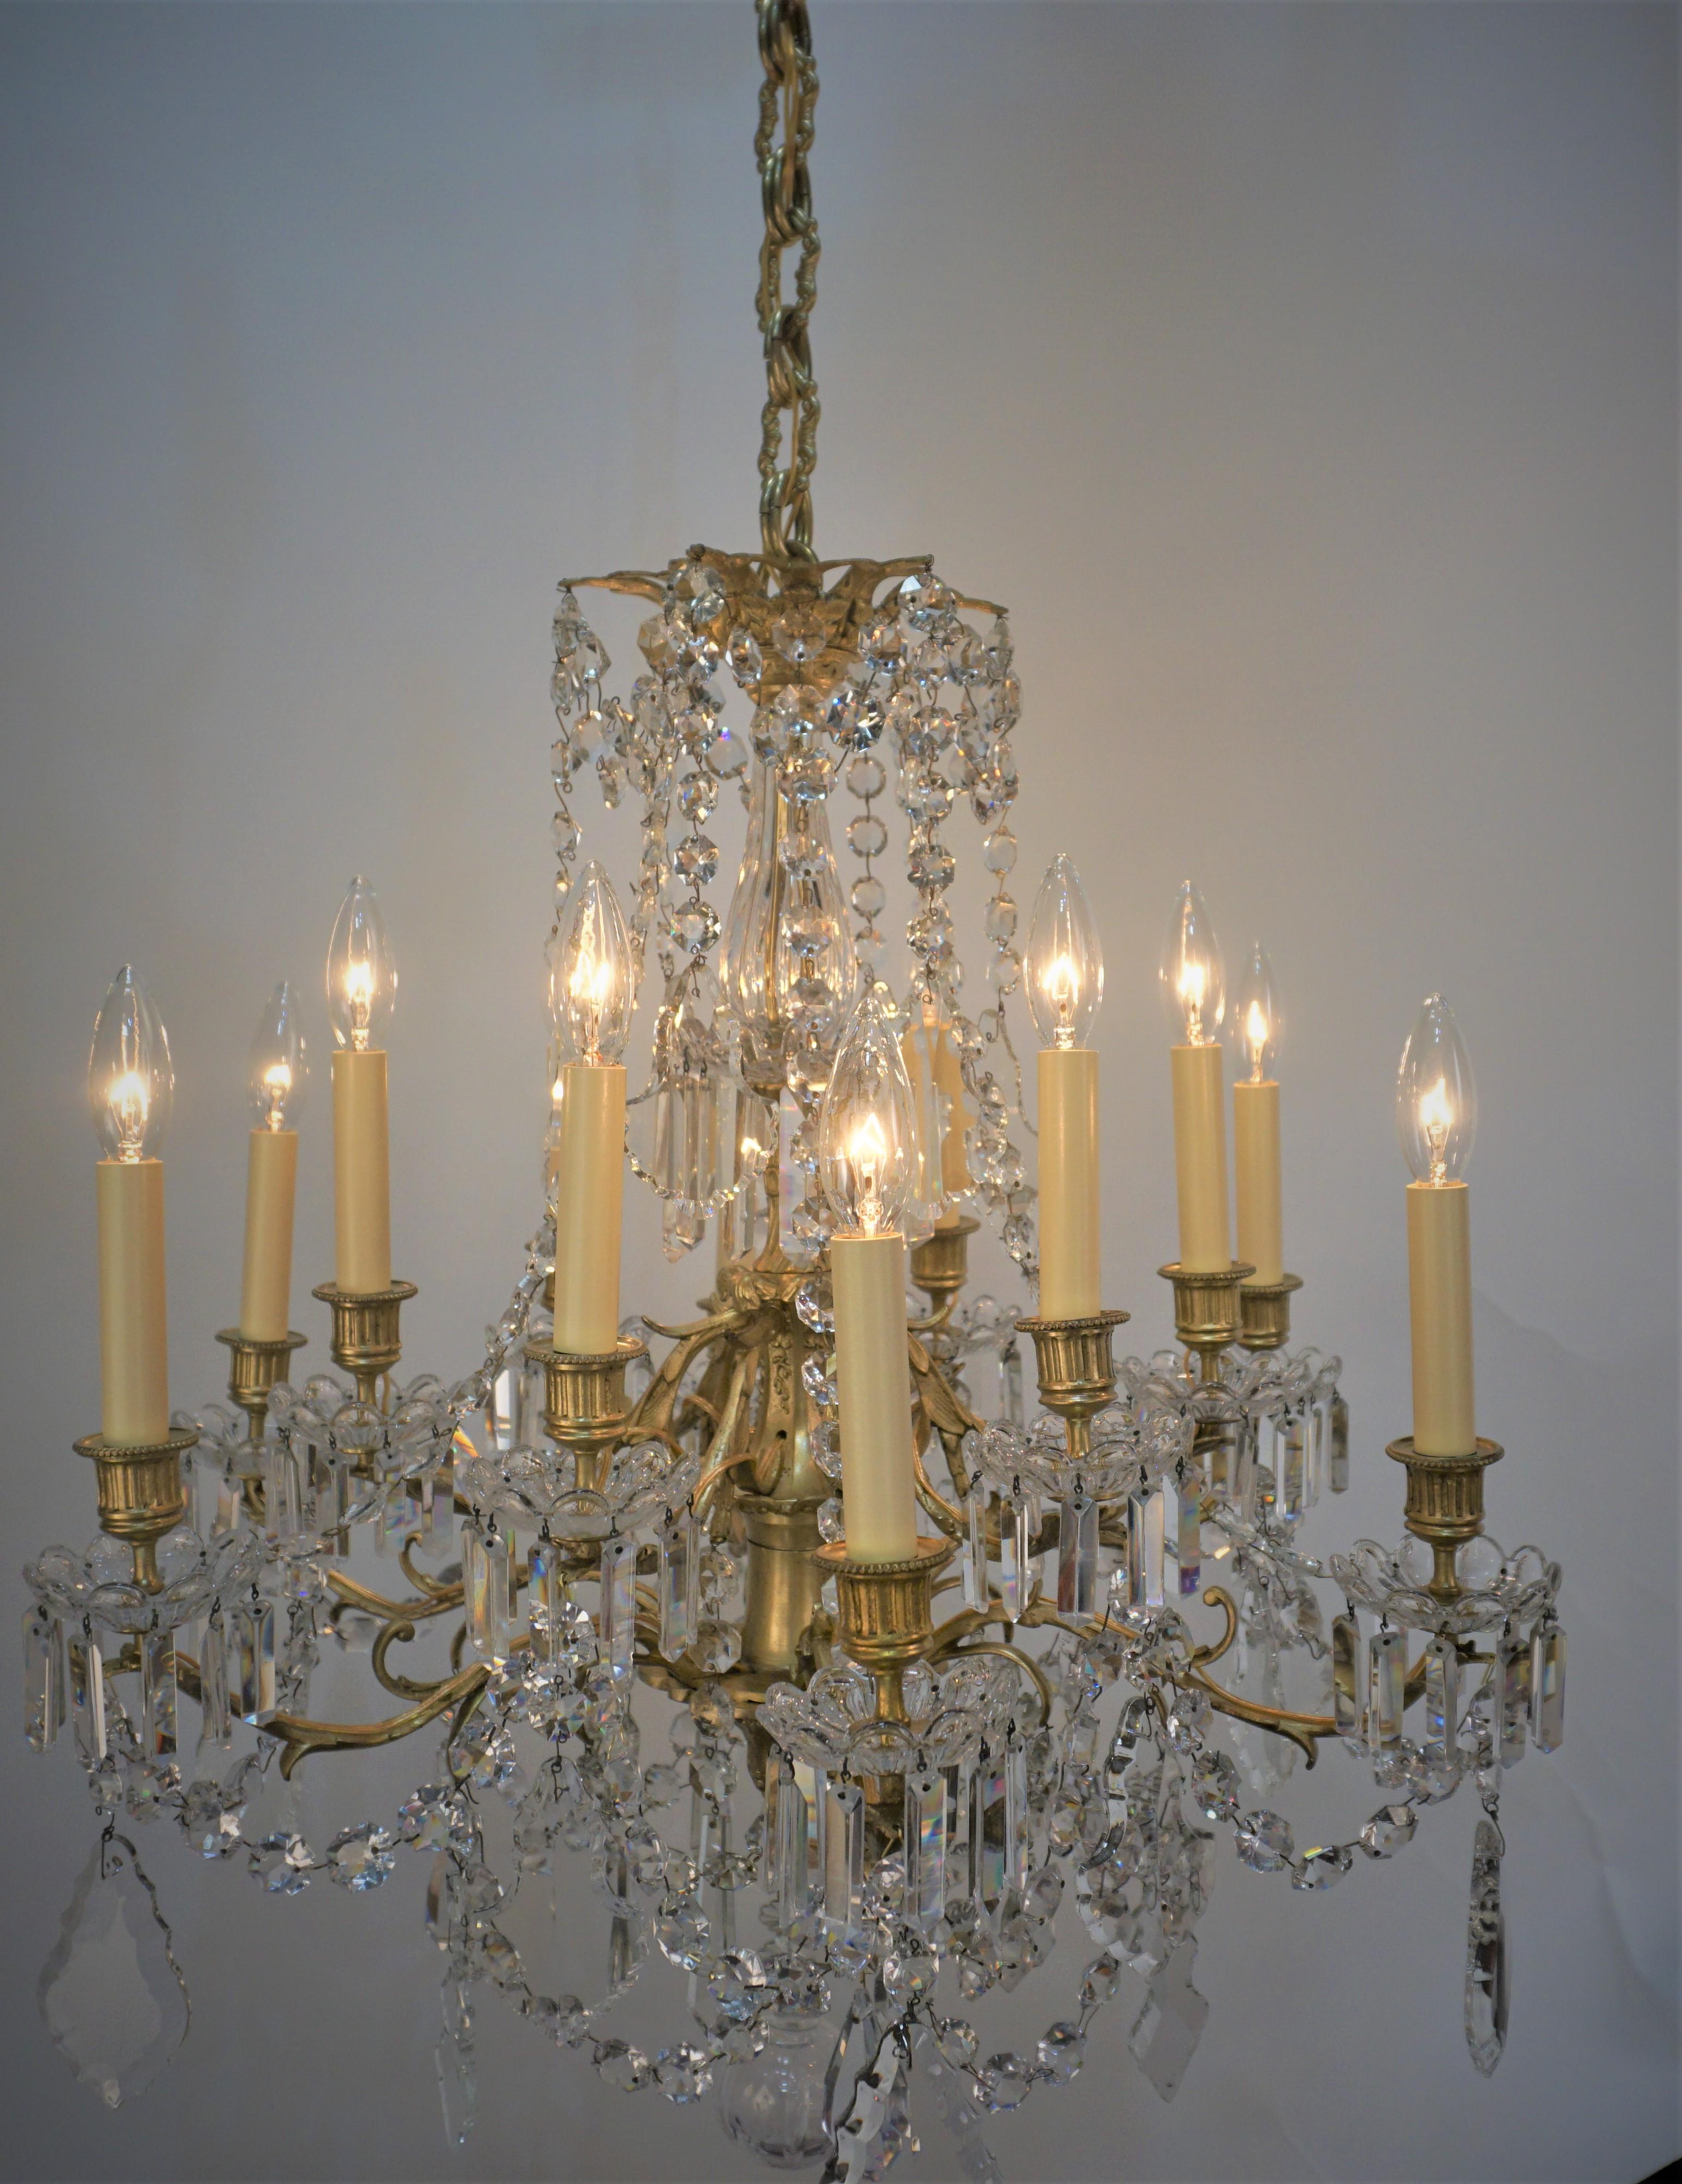 19th Century twelve Light Baccarat Crystal Chandelier In Good Condition For Sale In Fairfax, VA